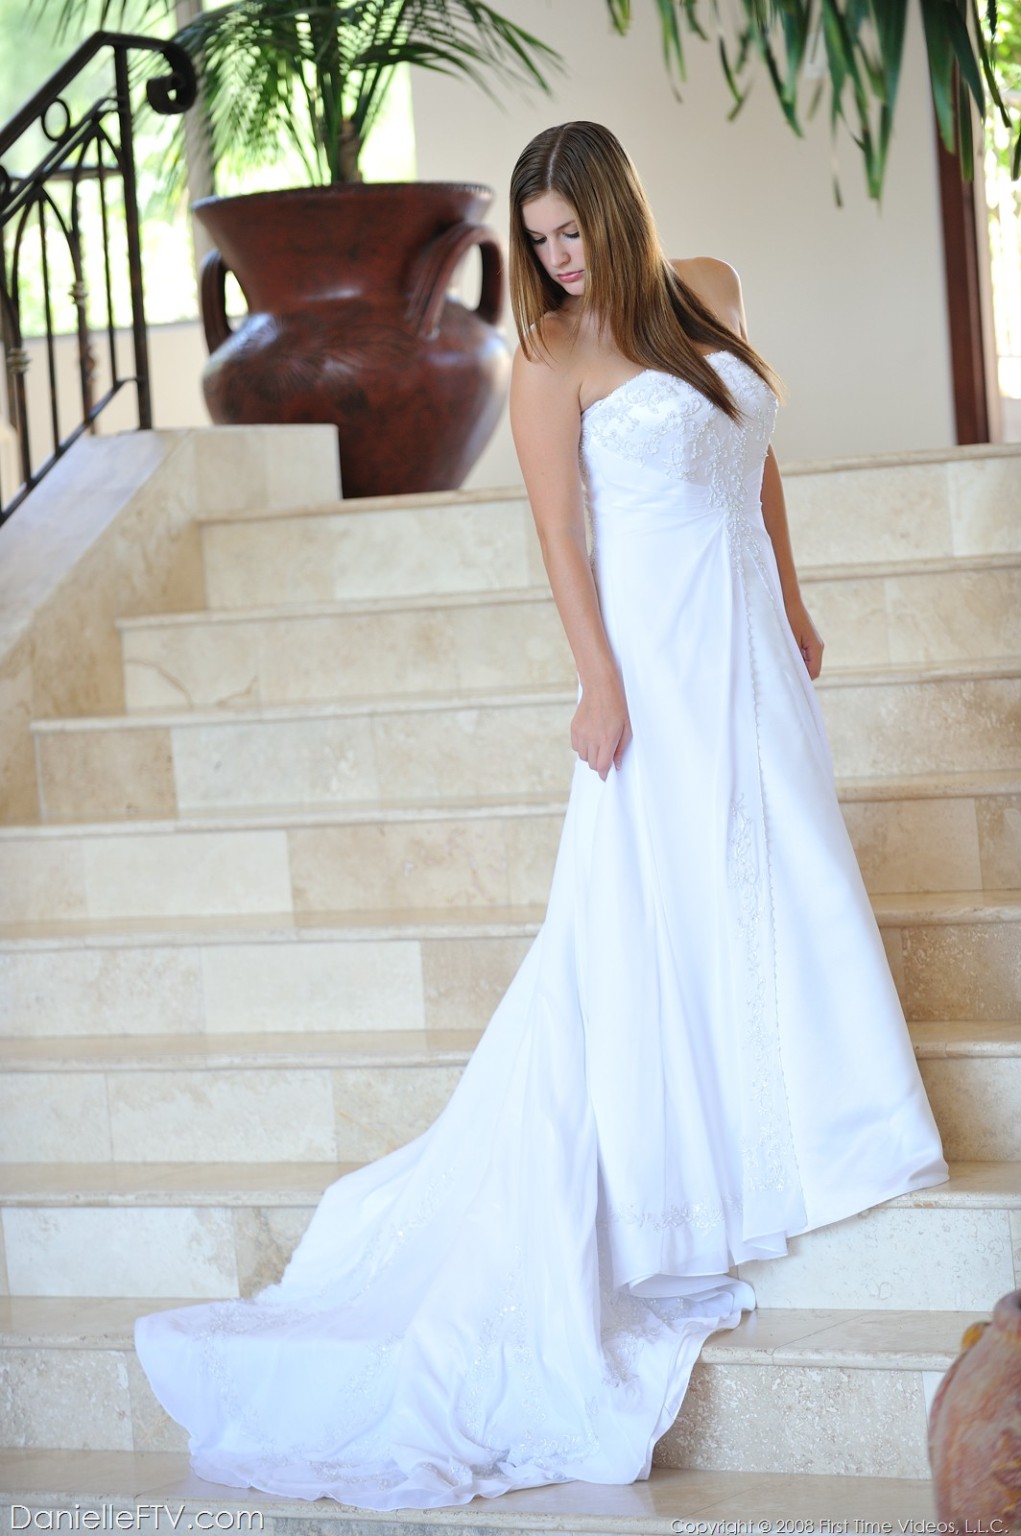 Danielle poses in a long white gown #68501333